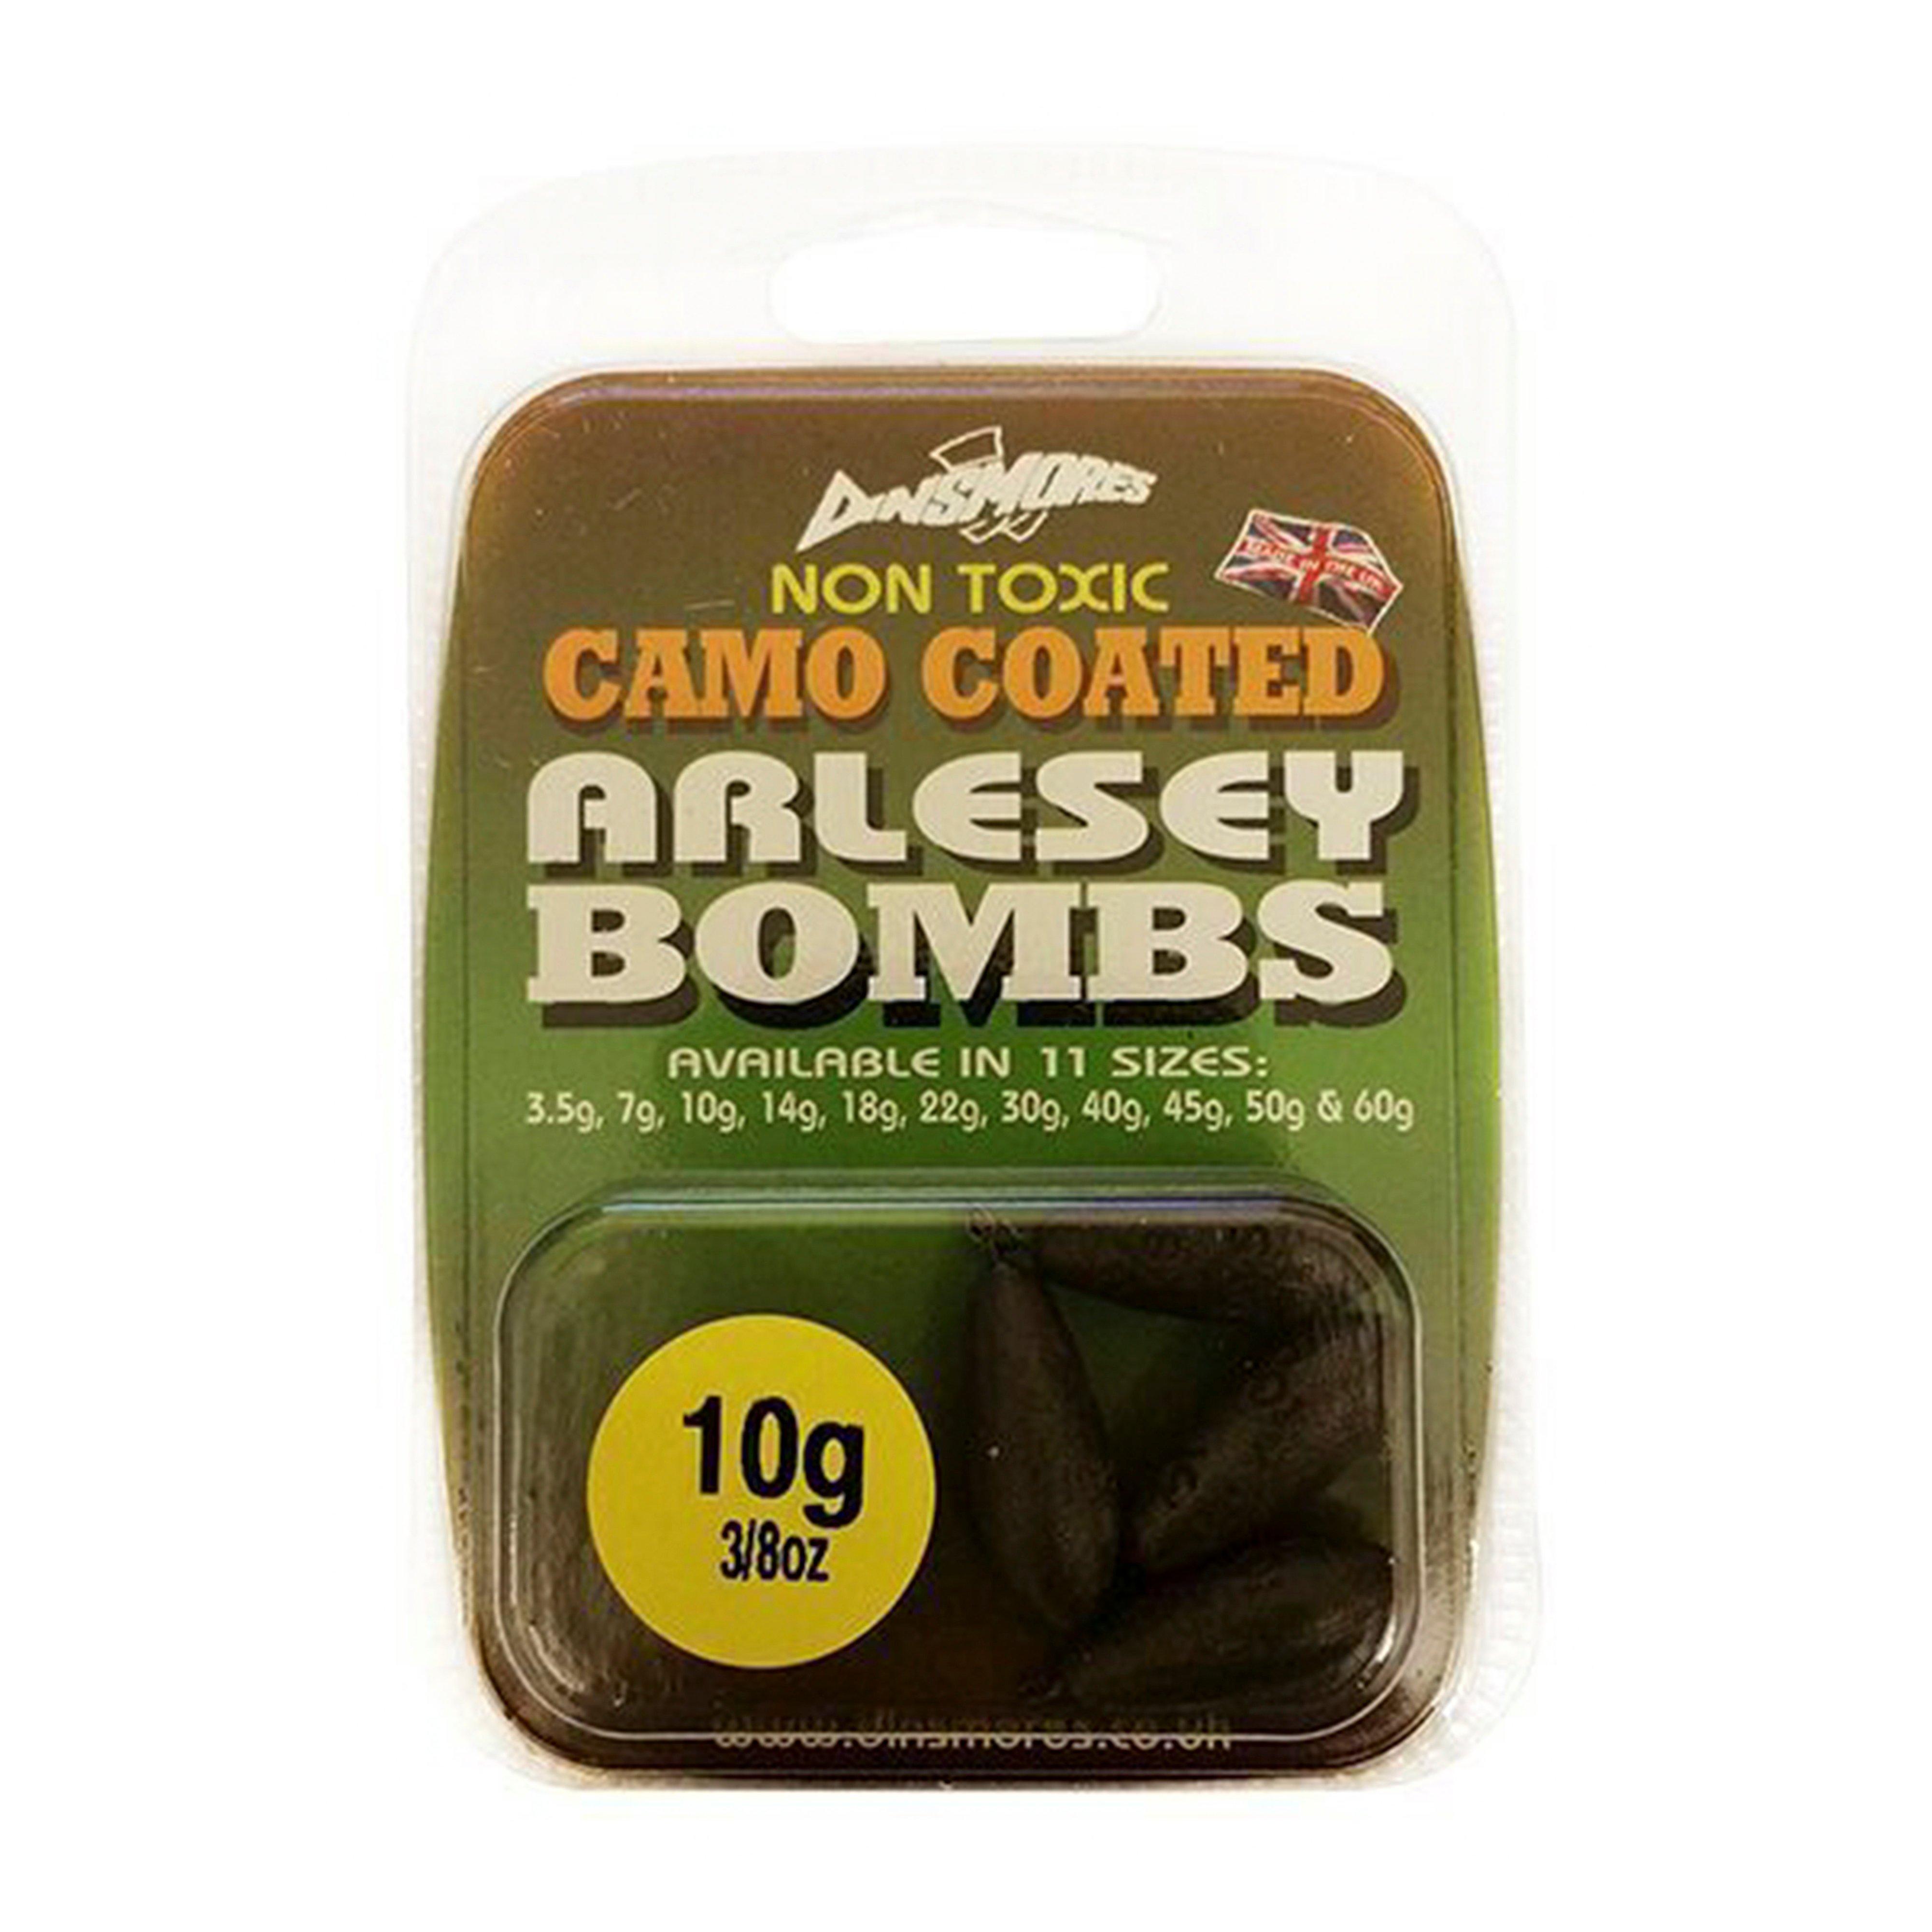 Dinsmores Sinking Arlesey Bombs (14g) Pack of Two Review